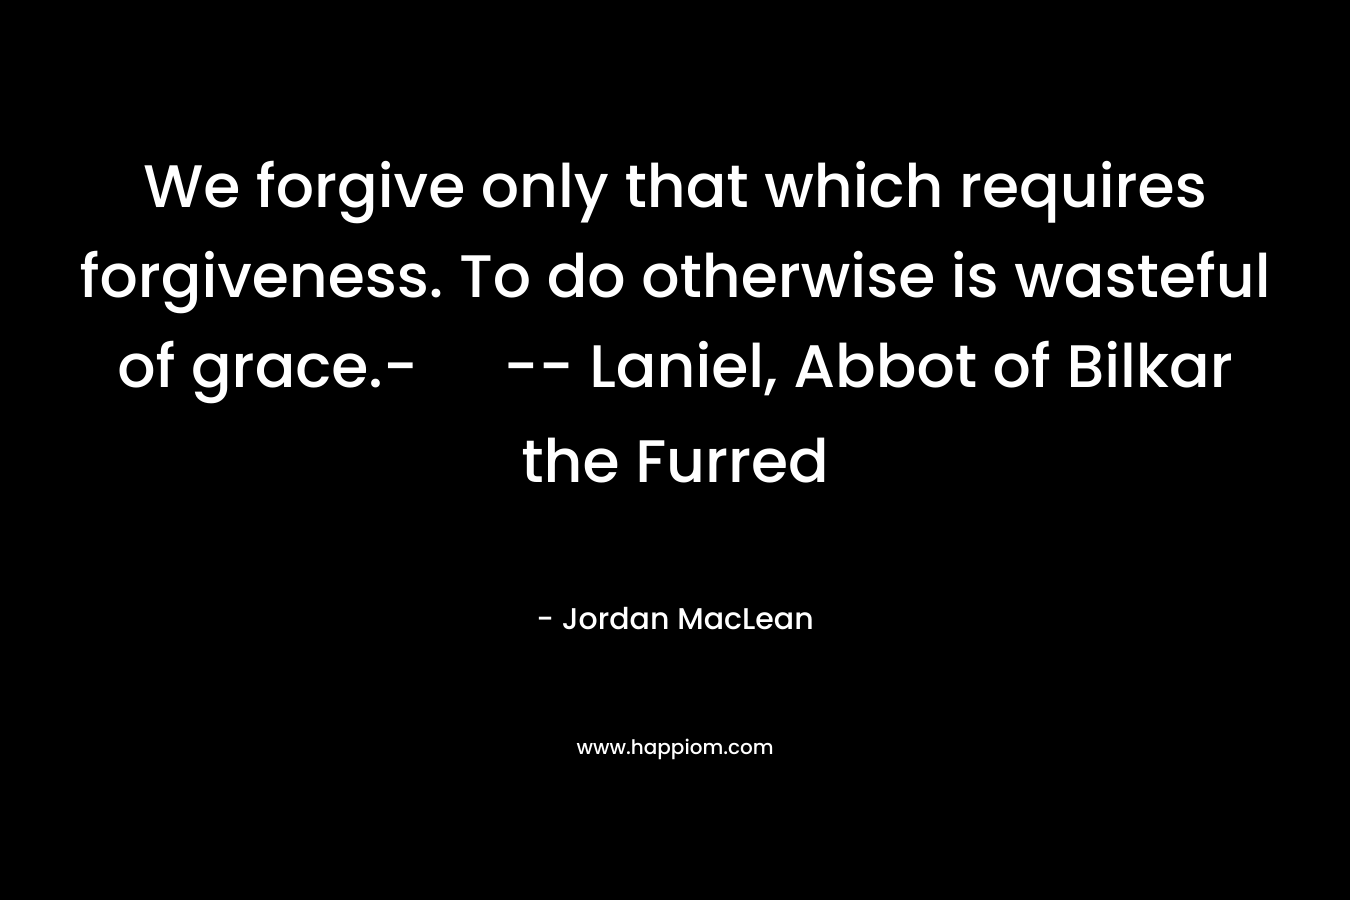 We forgive only that which requires forgiveness. To do otherwise is wasteful of grace.- -- Laniel, Abbot of Bilkar the Furred